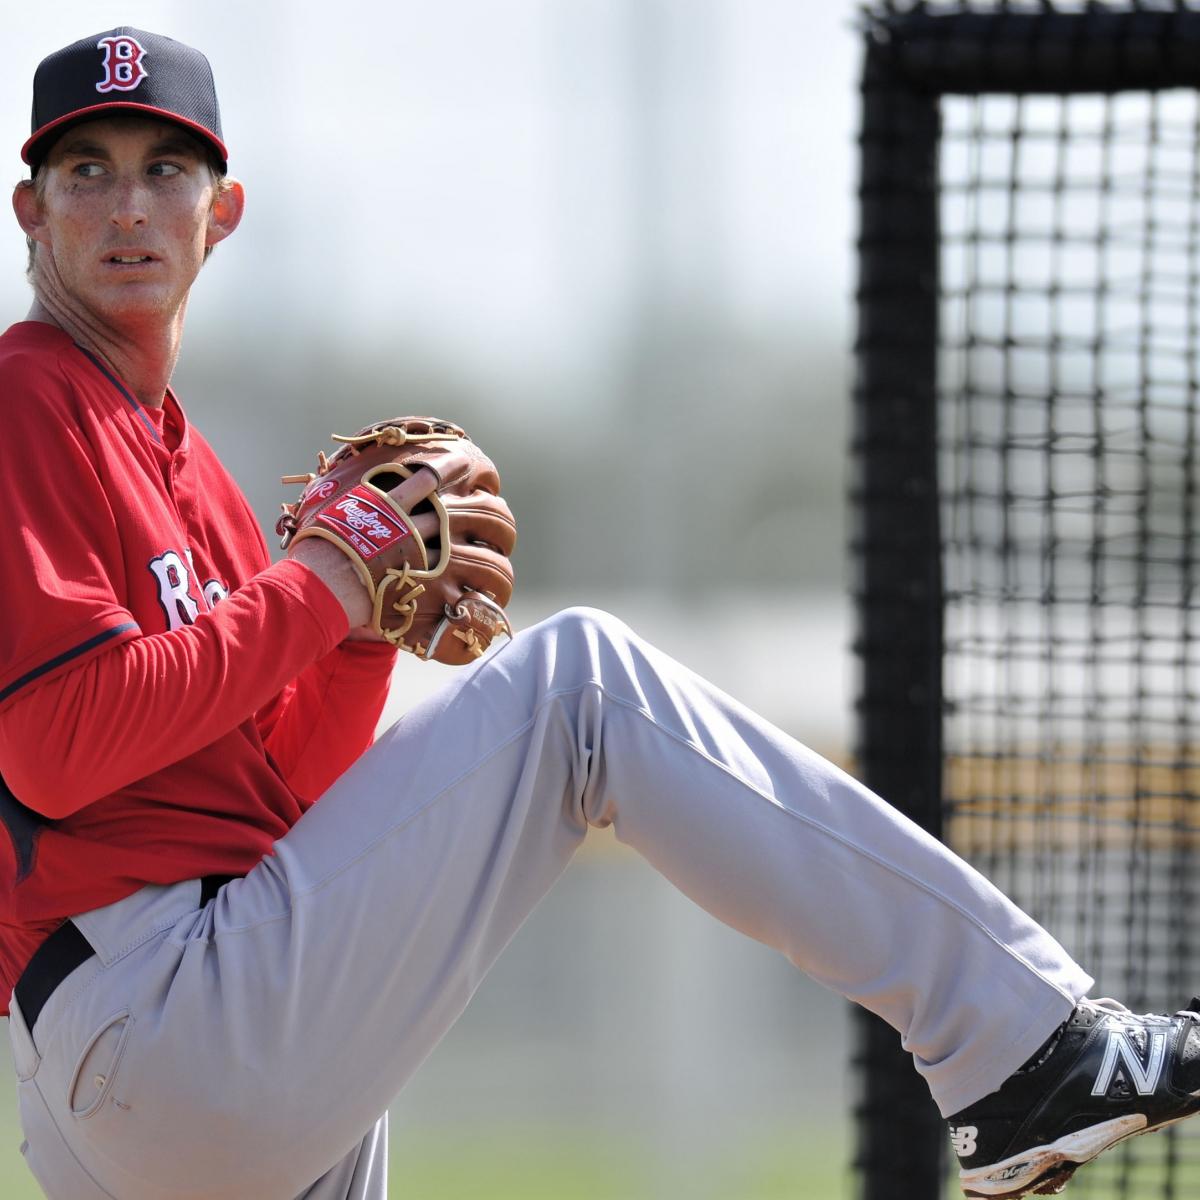 ReRanking Boston Red Sox's Top 10 Prospects After the Deadline News